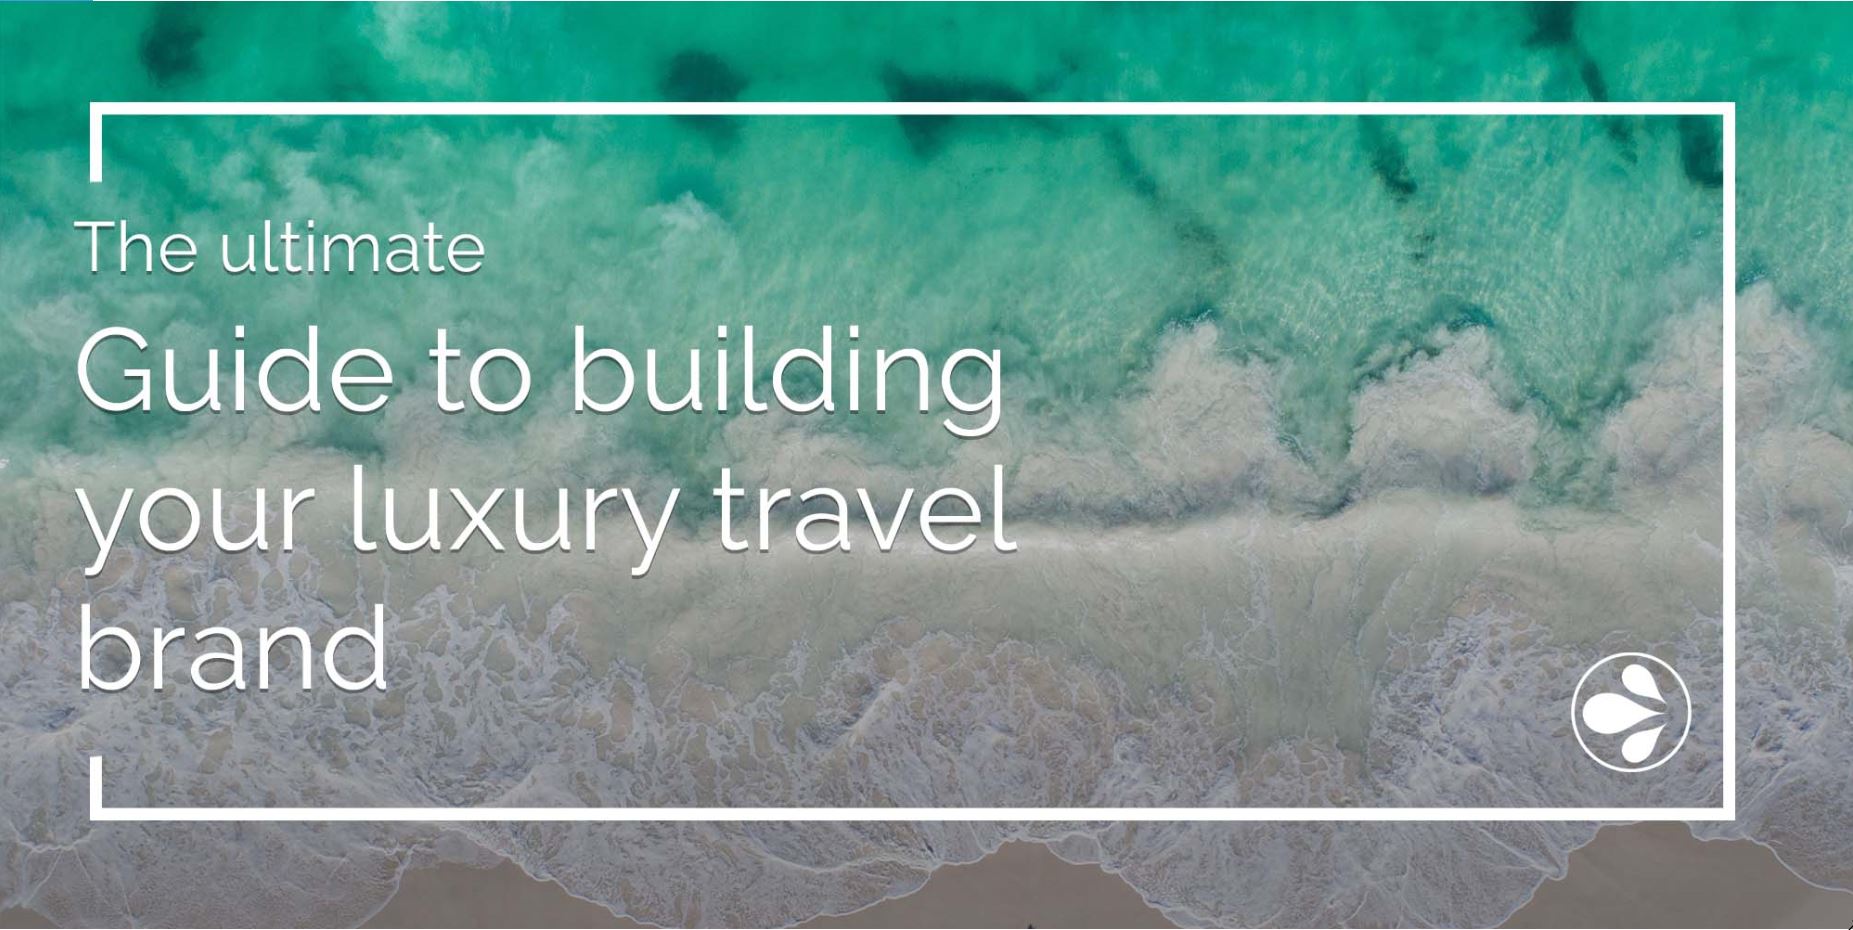 The Ultimate Guide to Building your Luxury Travel Brand